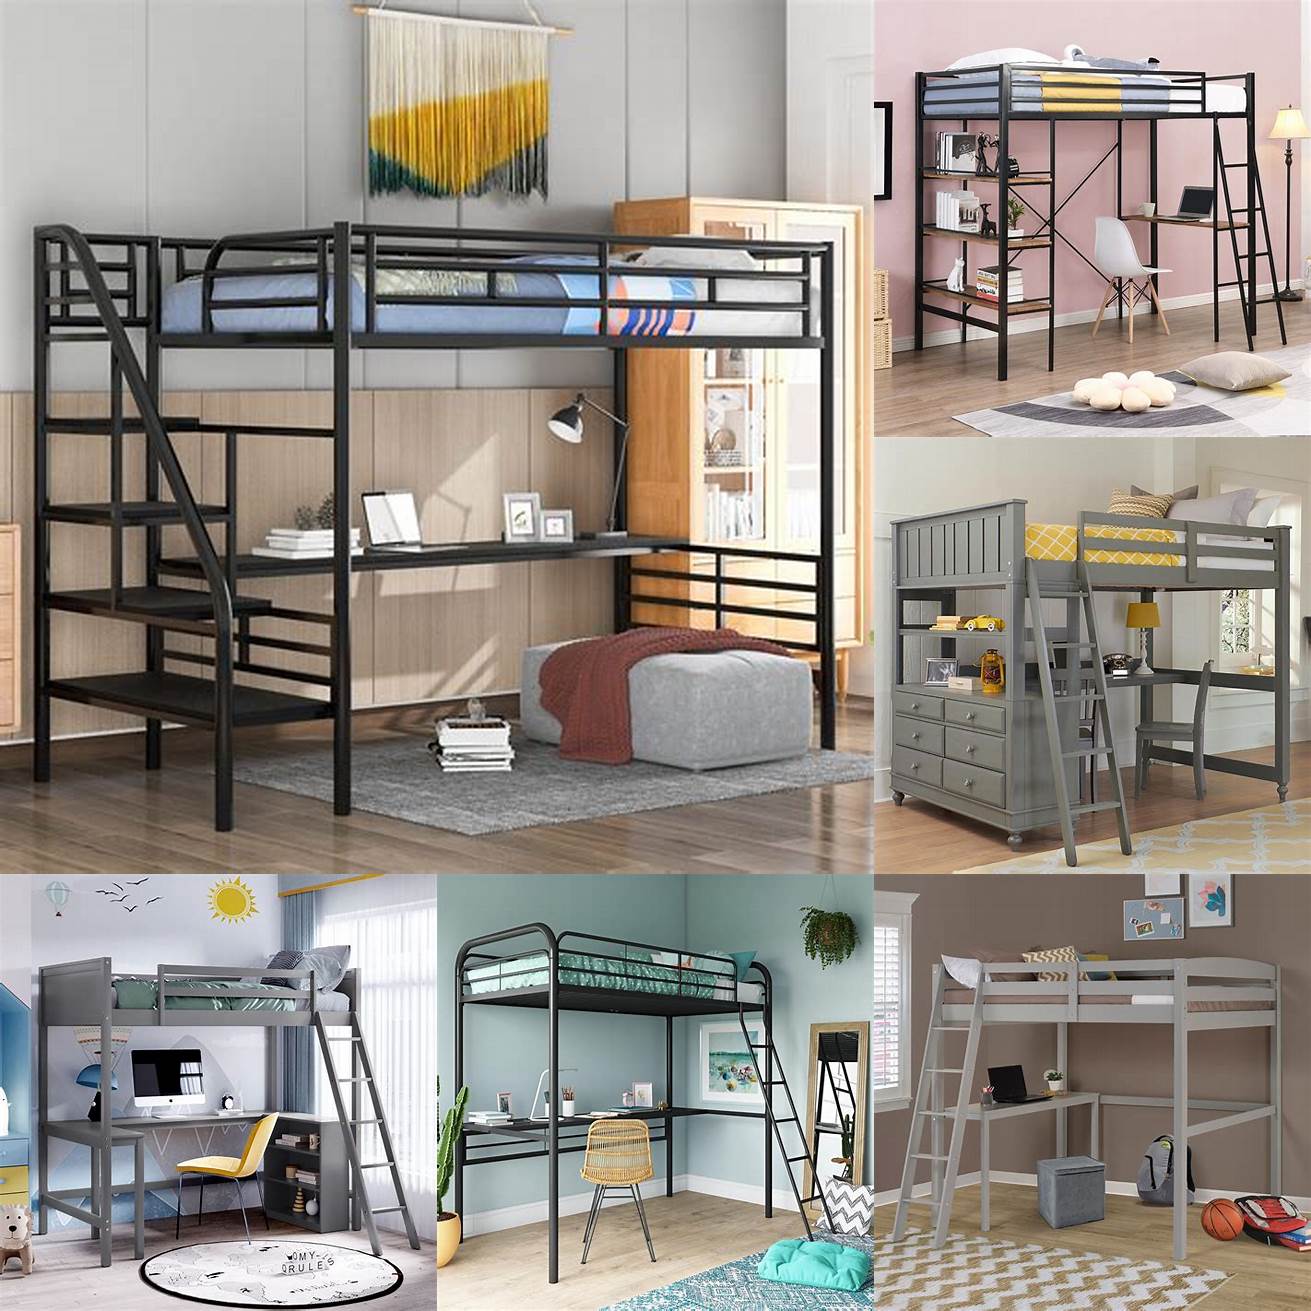 This industrial set includes a loft bed frame bookshelf and desk perfect for a boy who loves building and creating